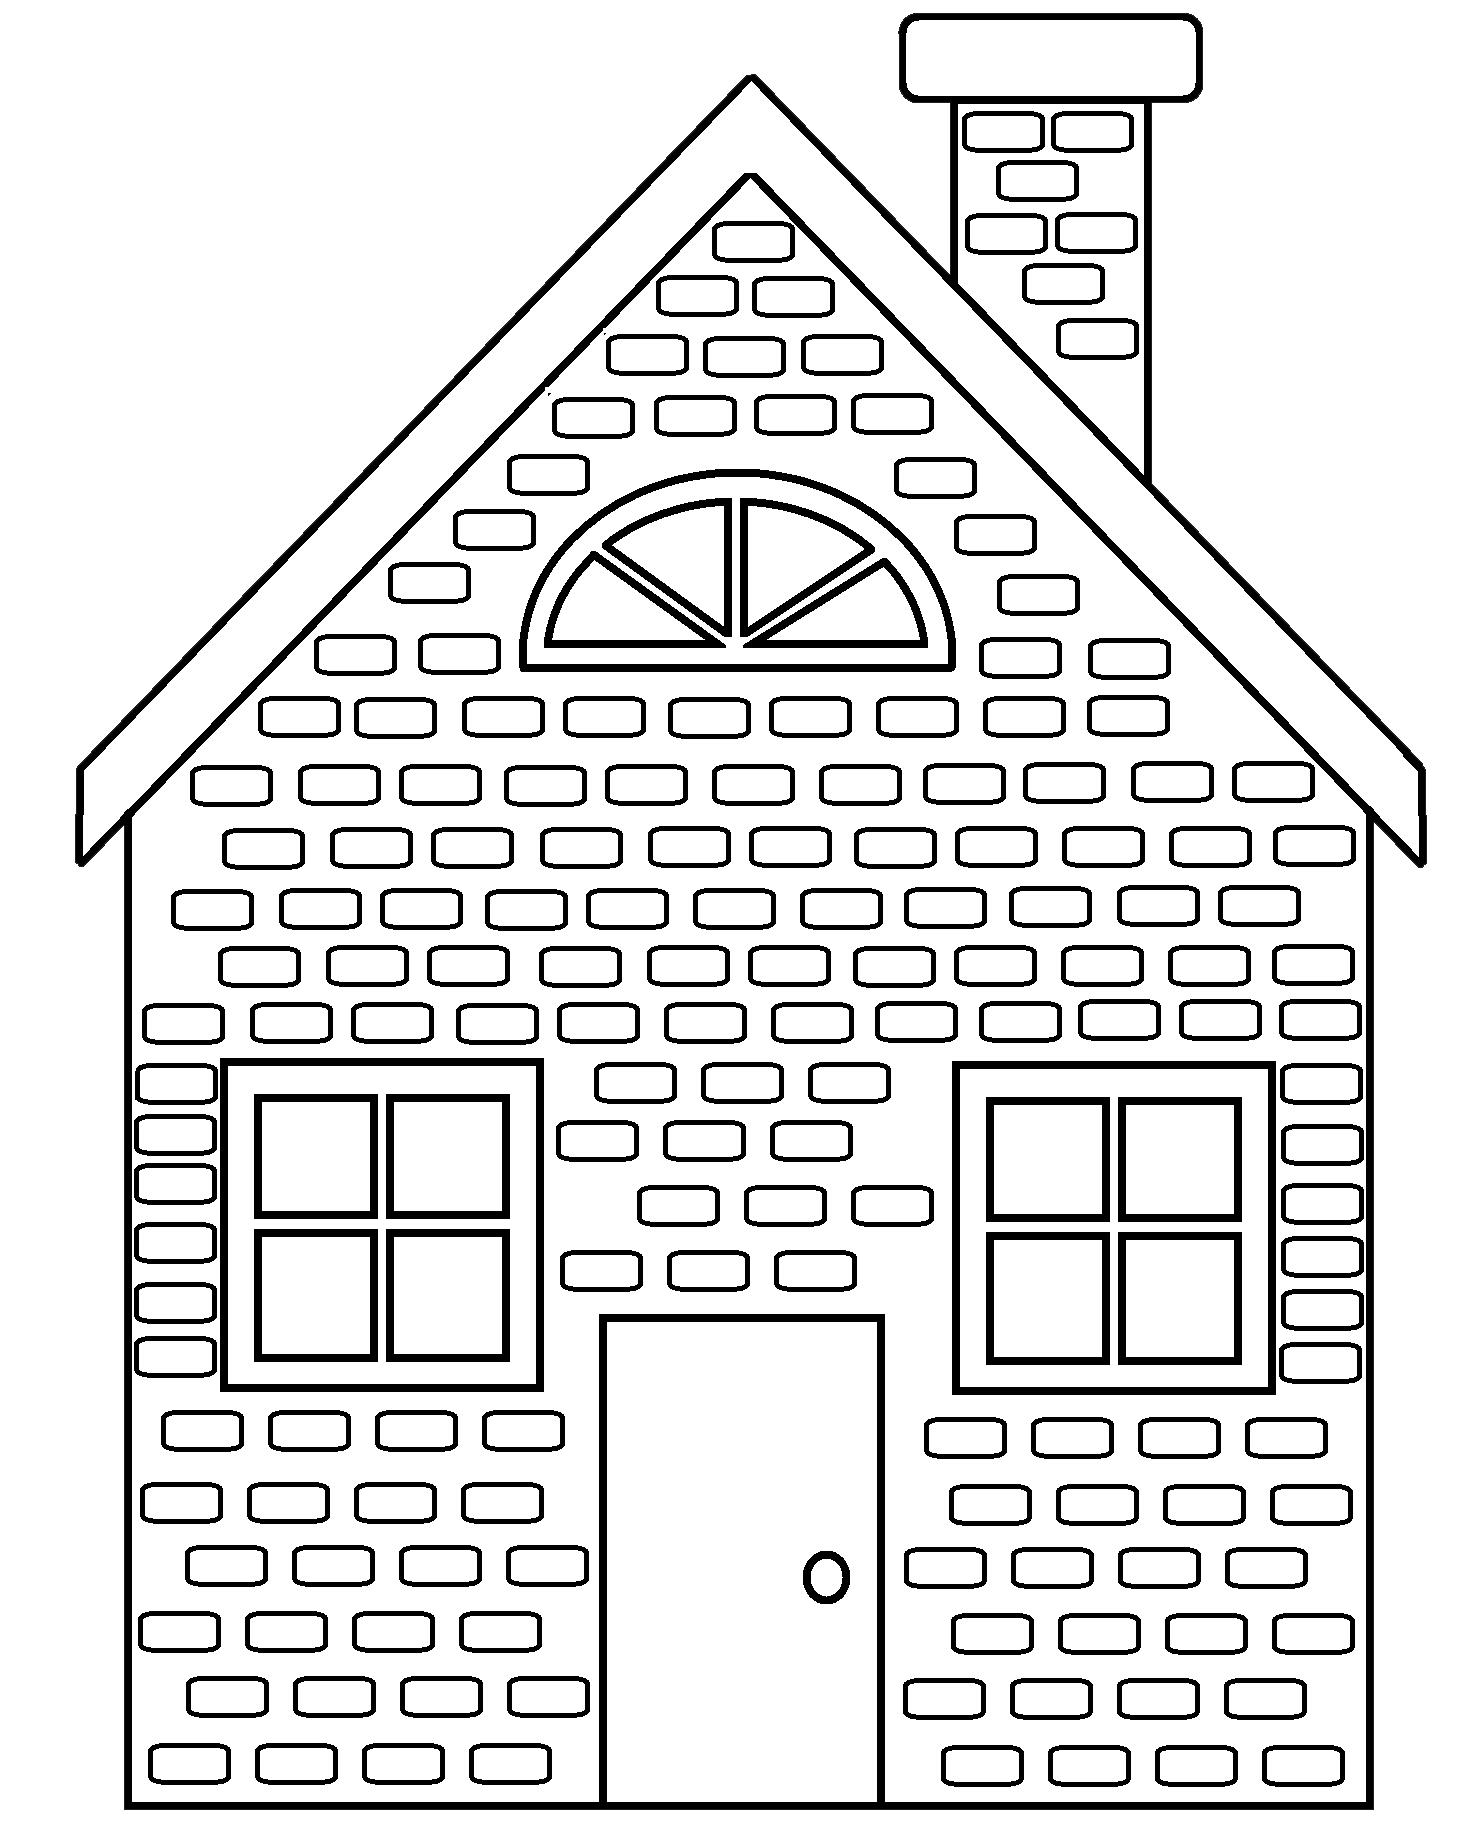 9 Pics of Brick House Coloring Page 3 Little Pigs Brick House